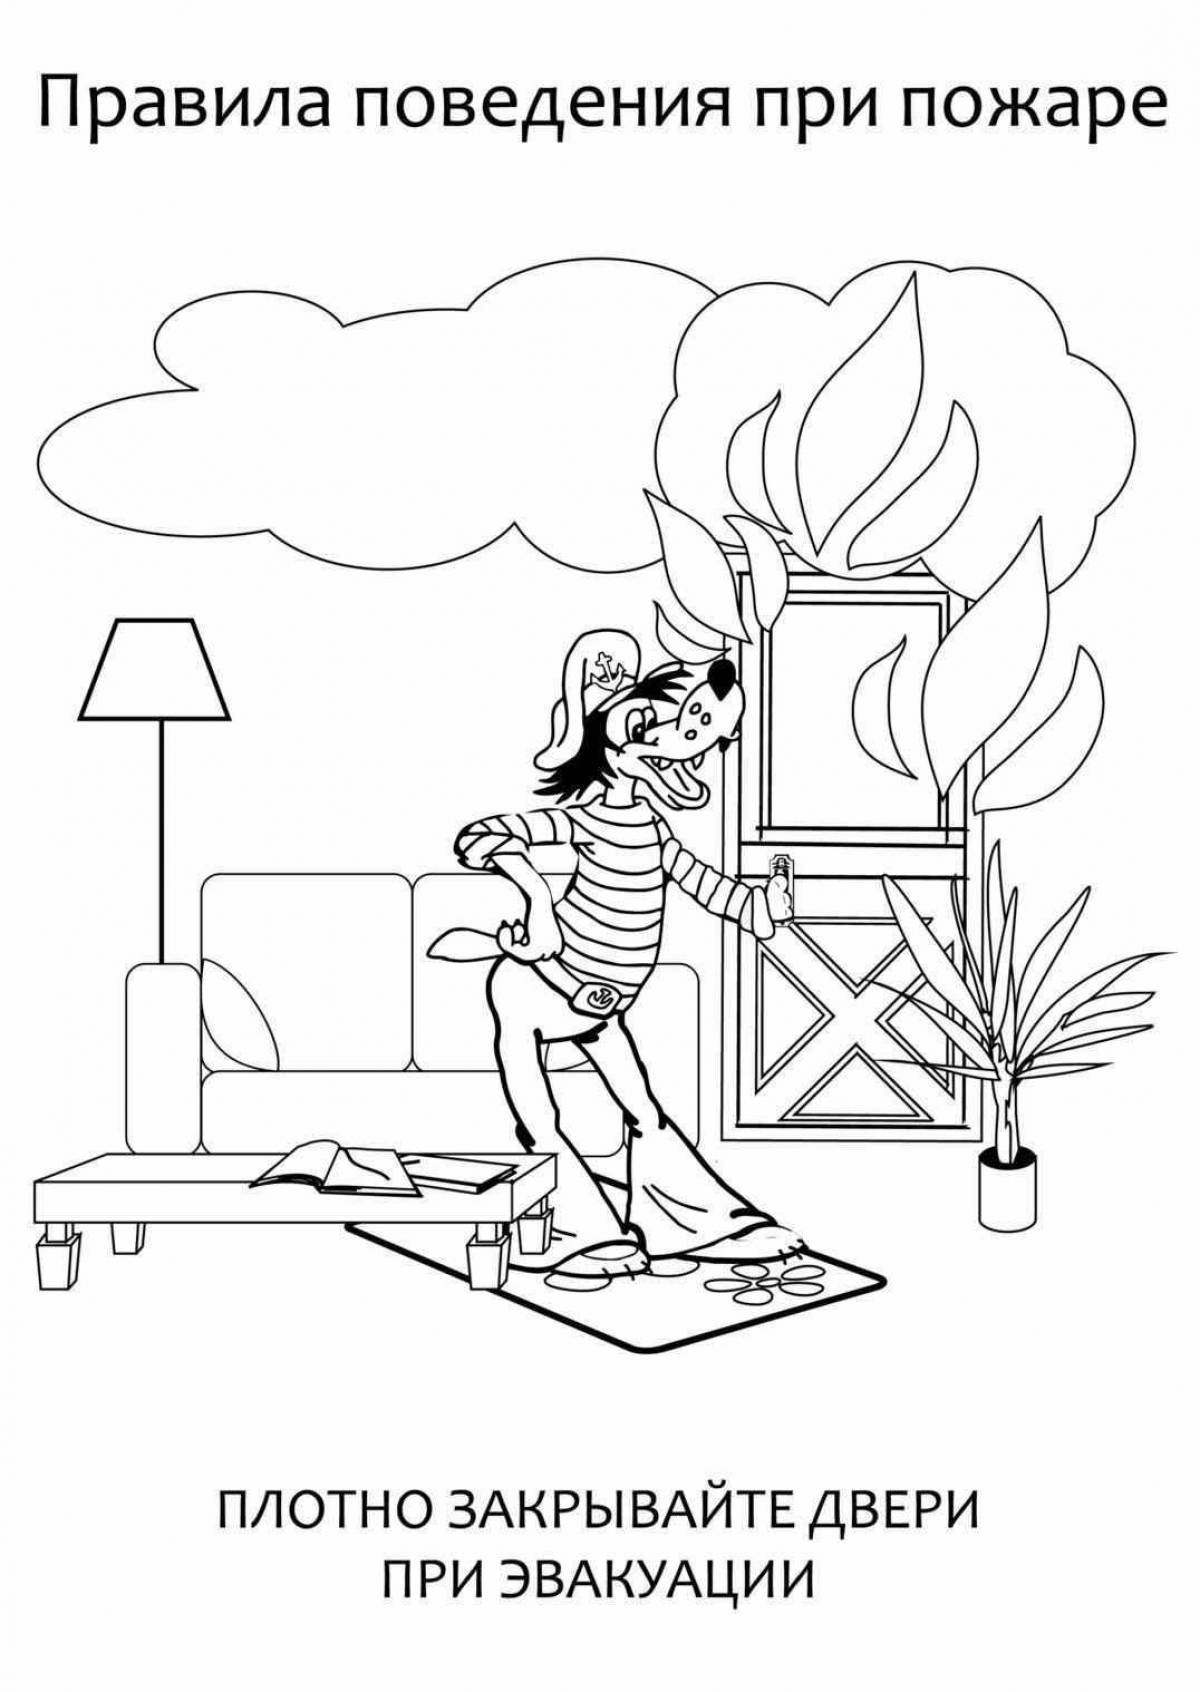 Creative home security coloring page